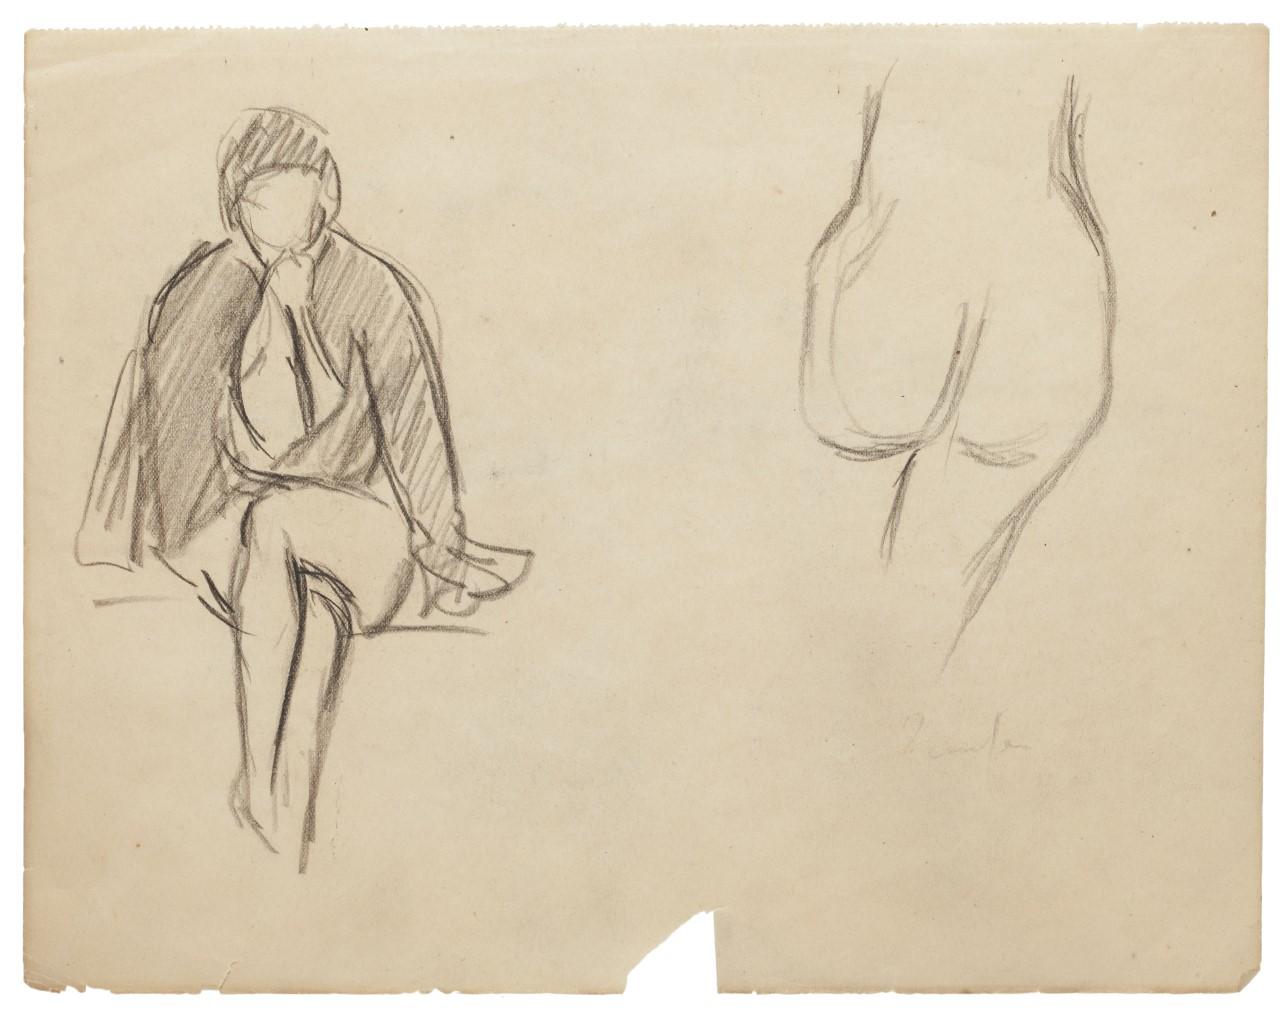 Nude Studies - Original Drawing - 20th Century - Art by Unknown